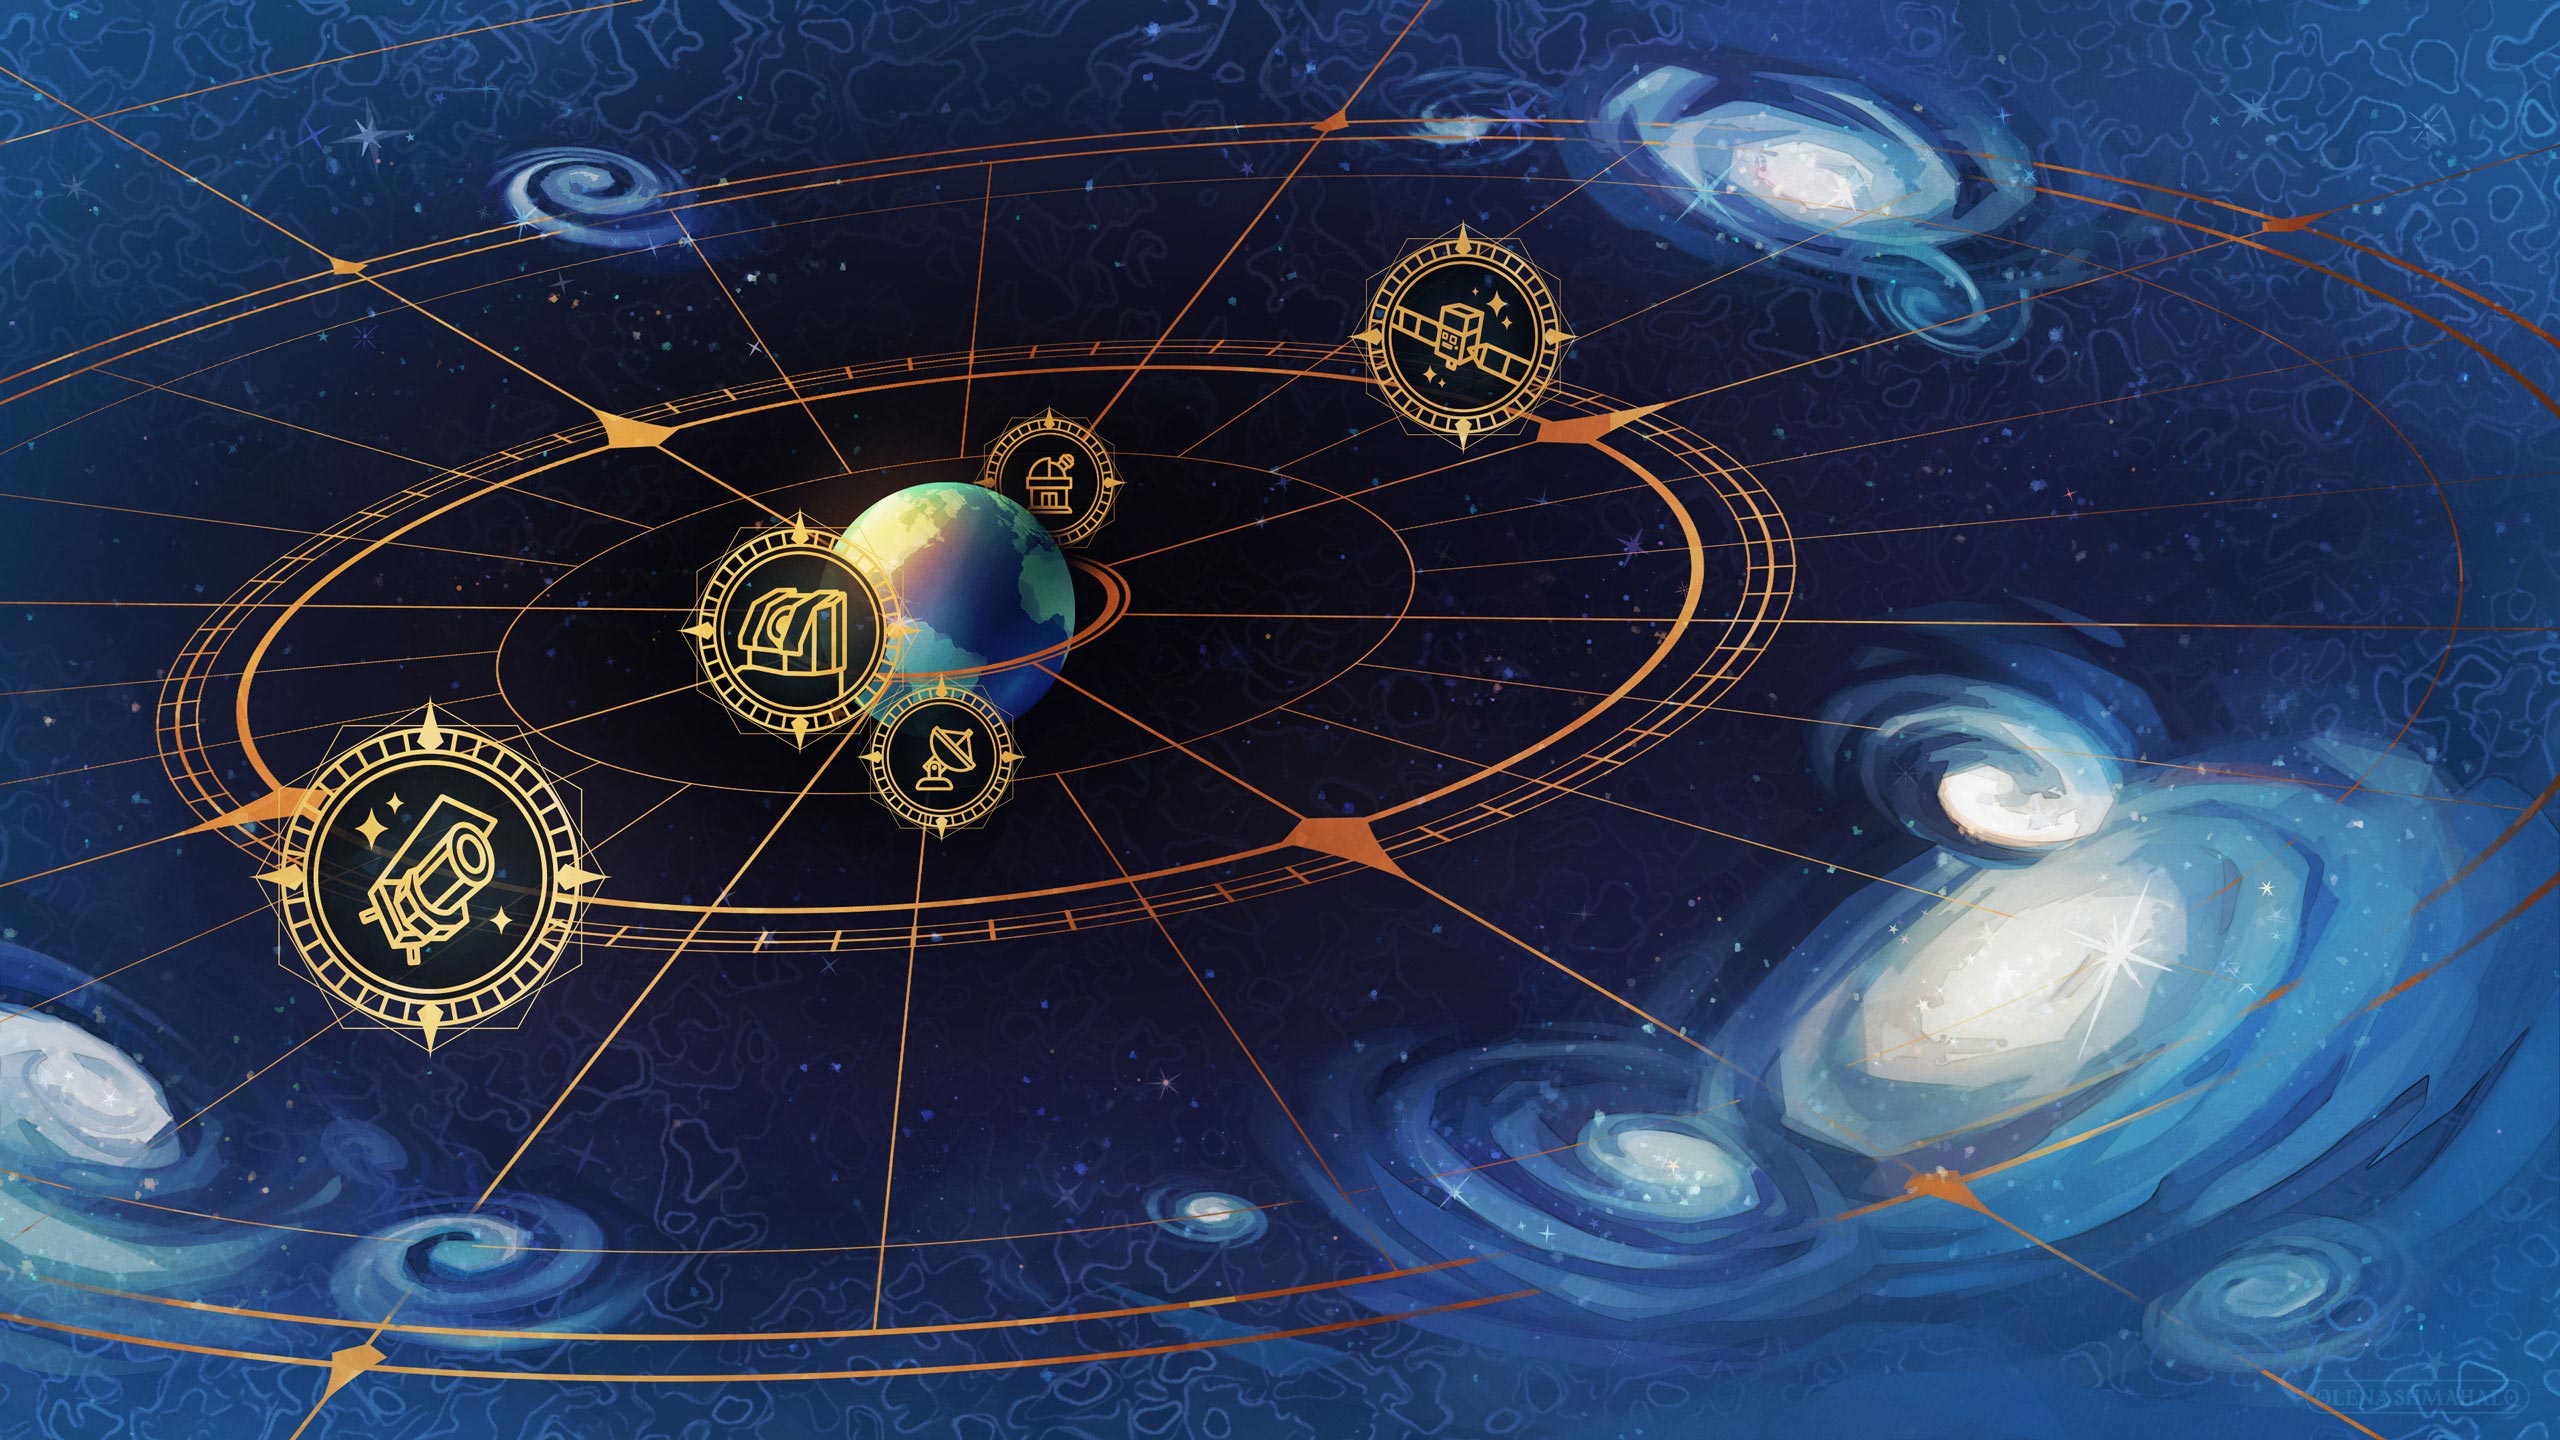 Stylized painting of earth in space inside a gold, radial compass design and surrounded by gold telescope icons, followed by clustered galaxies and CMB patterns at the outer edges.